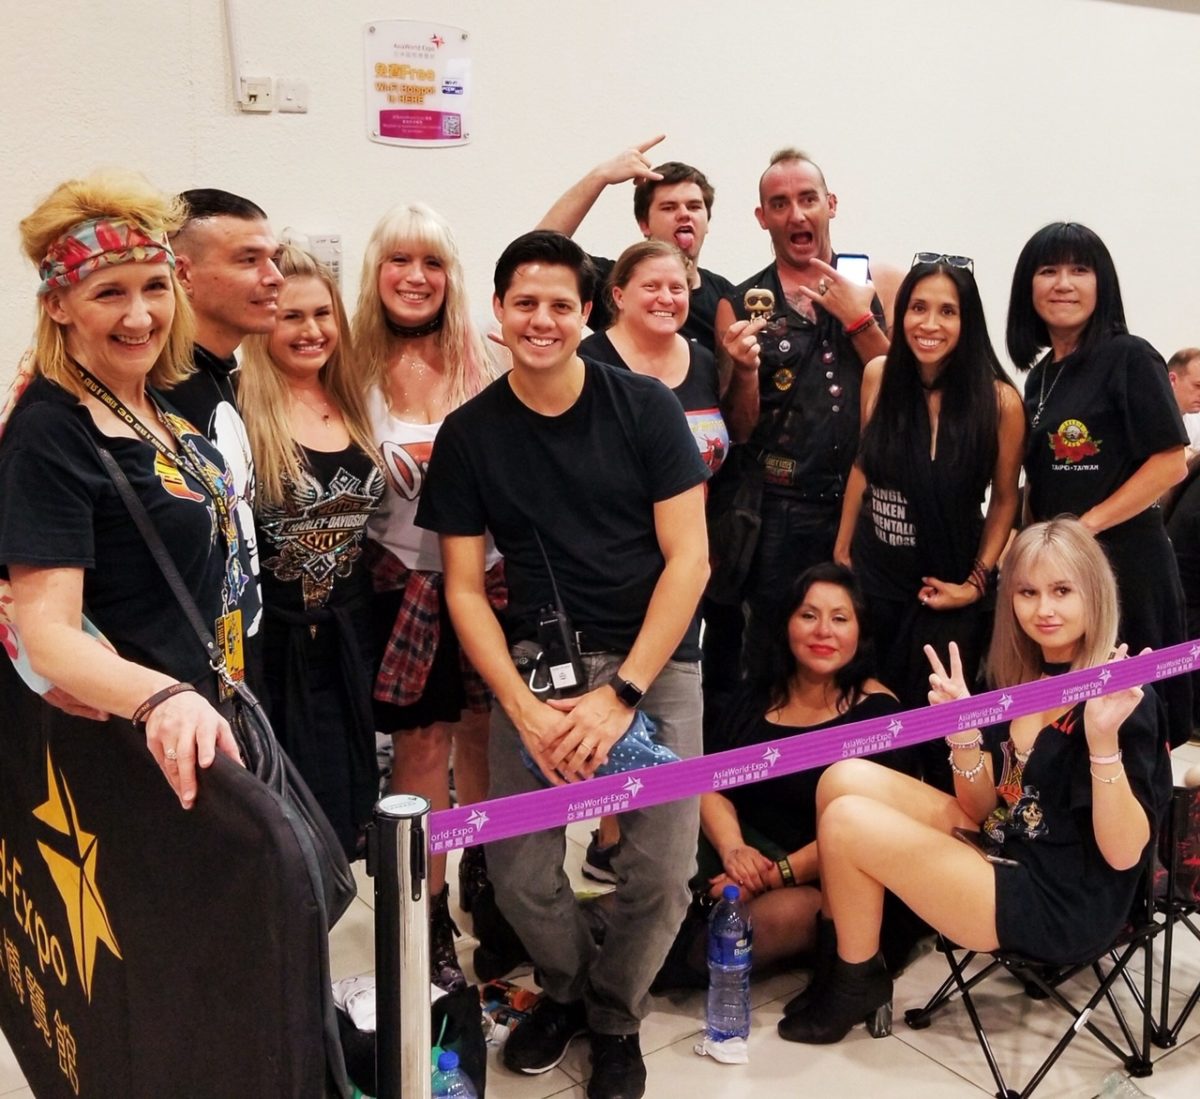 Lining up GA Pit Hong Kong Night 1 with Guilherme in the middle, a member of GN'R's management team!